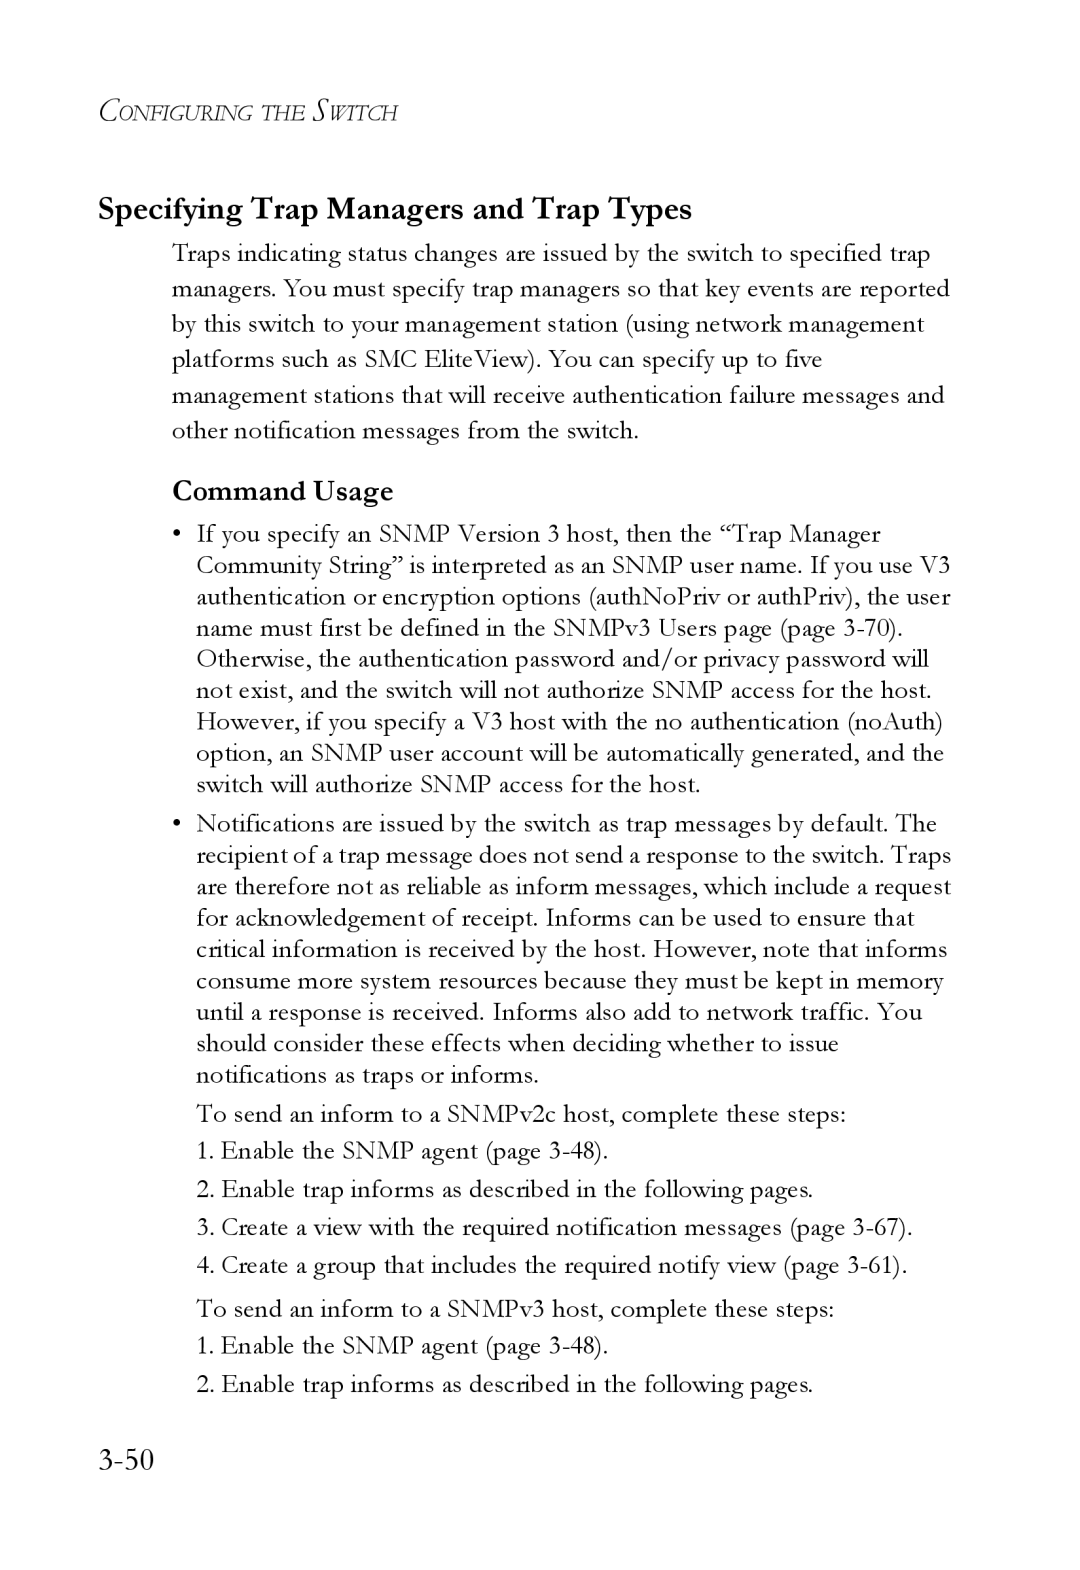 SMC Networks SMC6824M manual Specifying Trap Managers and Trap Types, Command Usage 